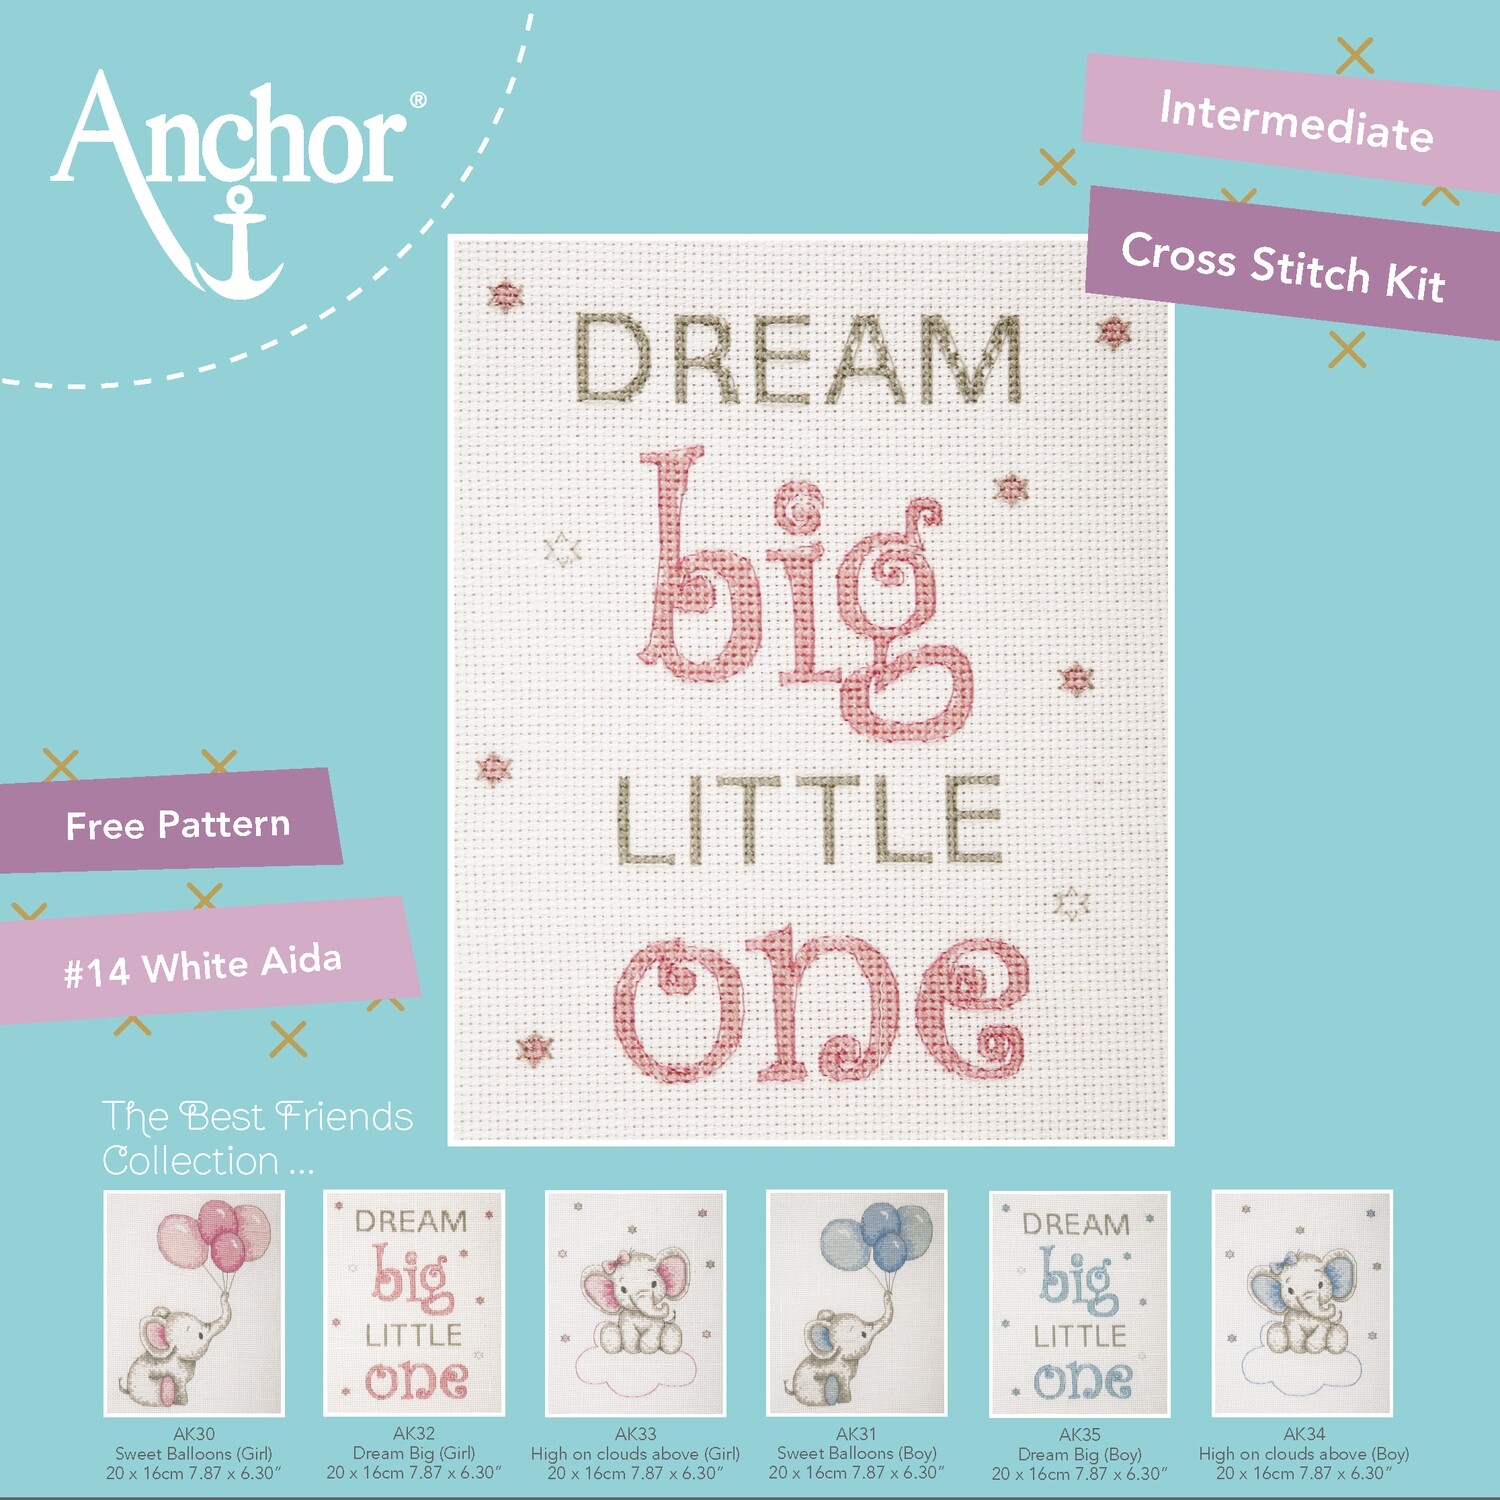 The Best Friends Collection - Dream Big (Pink) 20x16cm